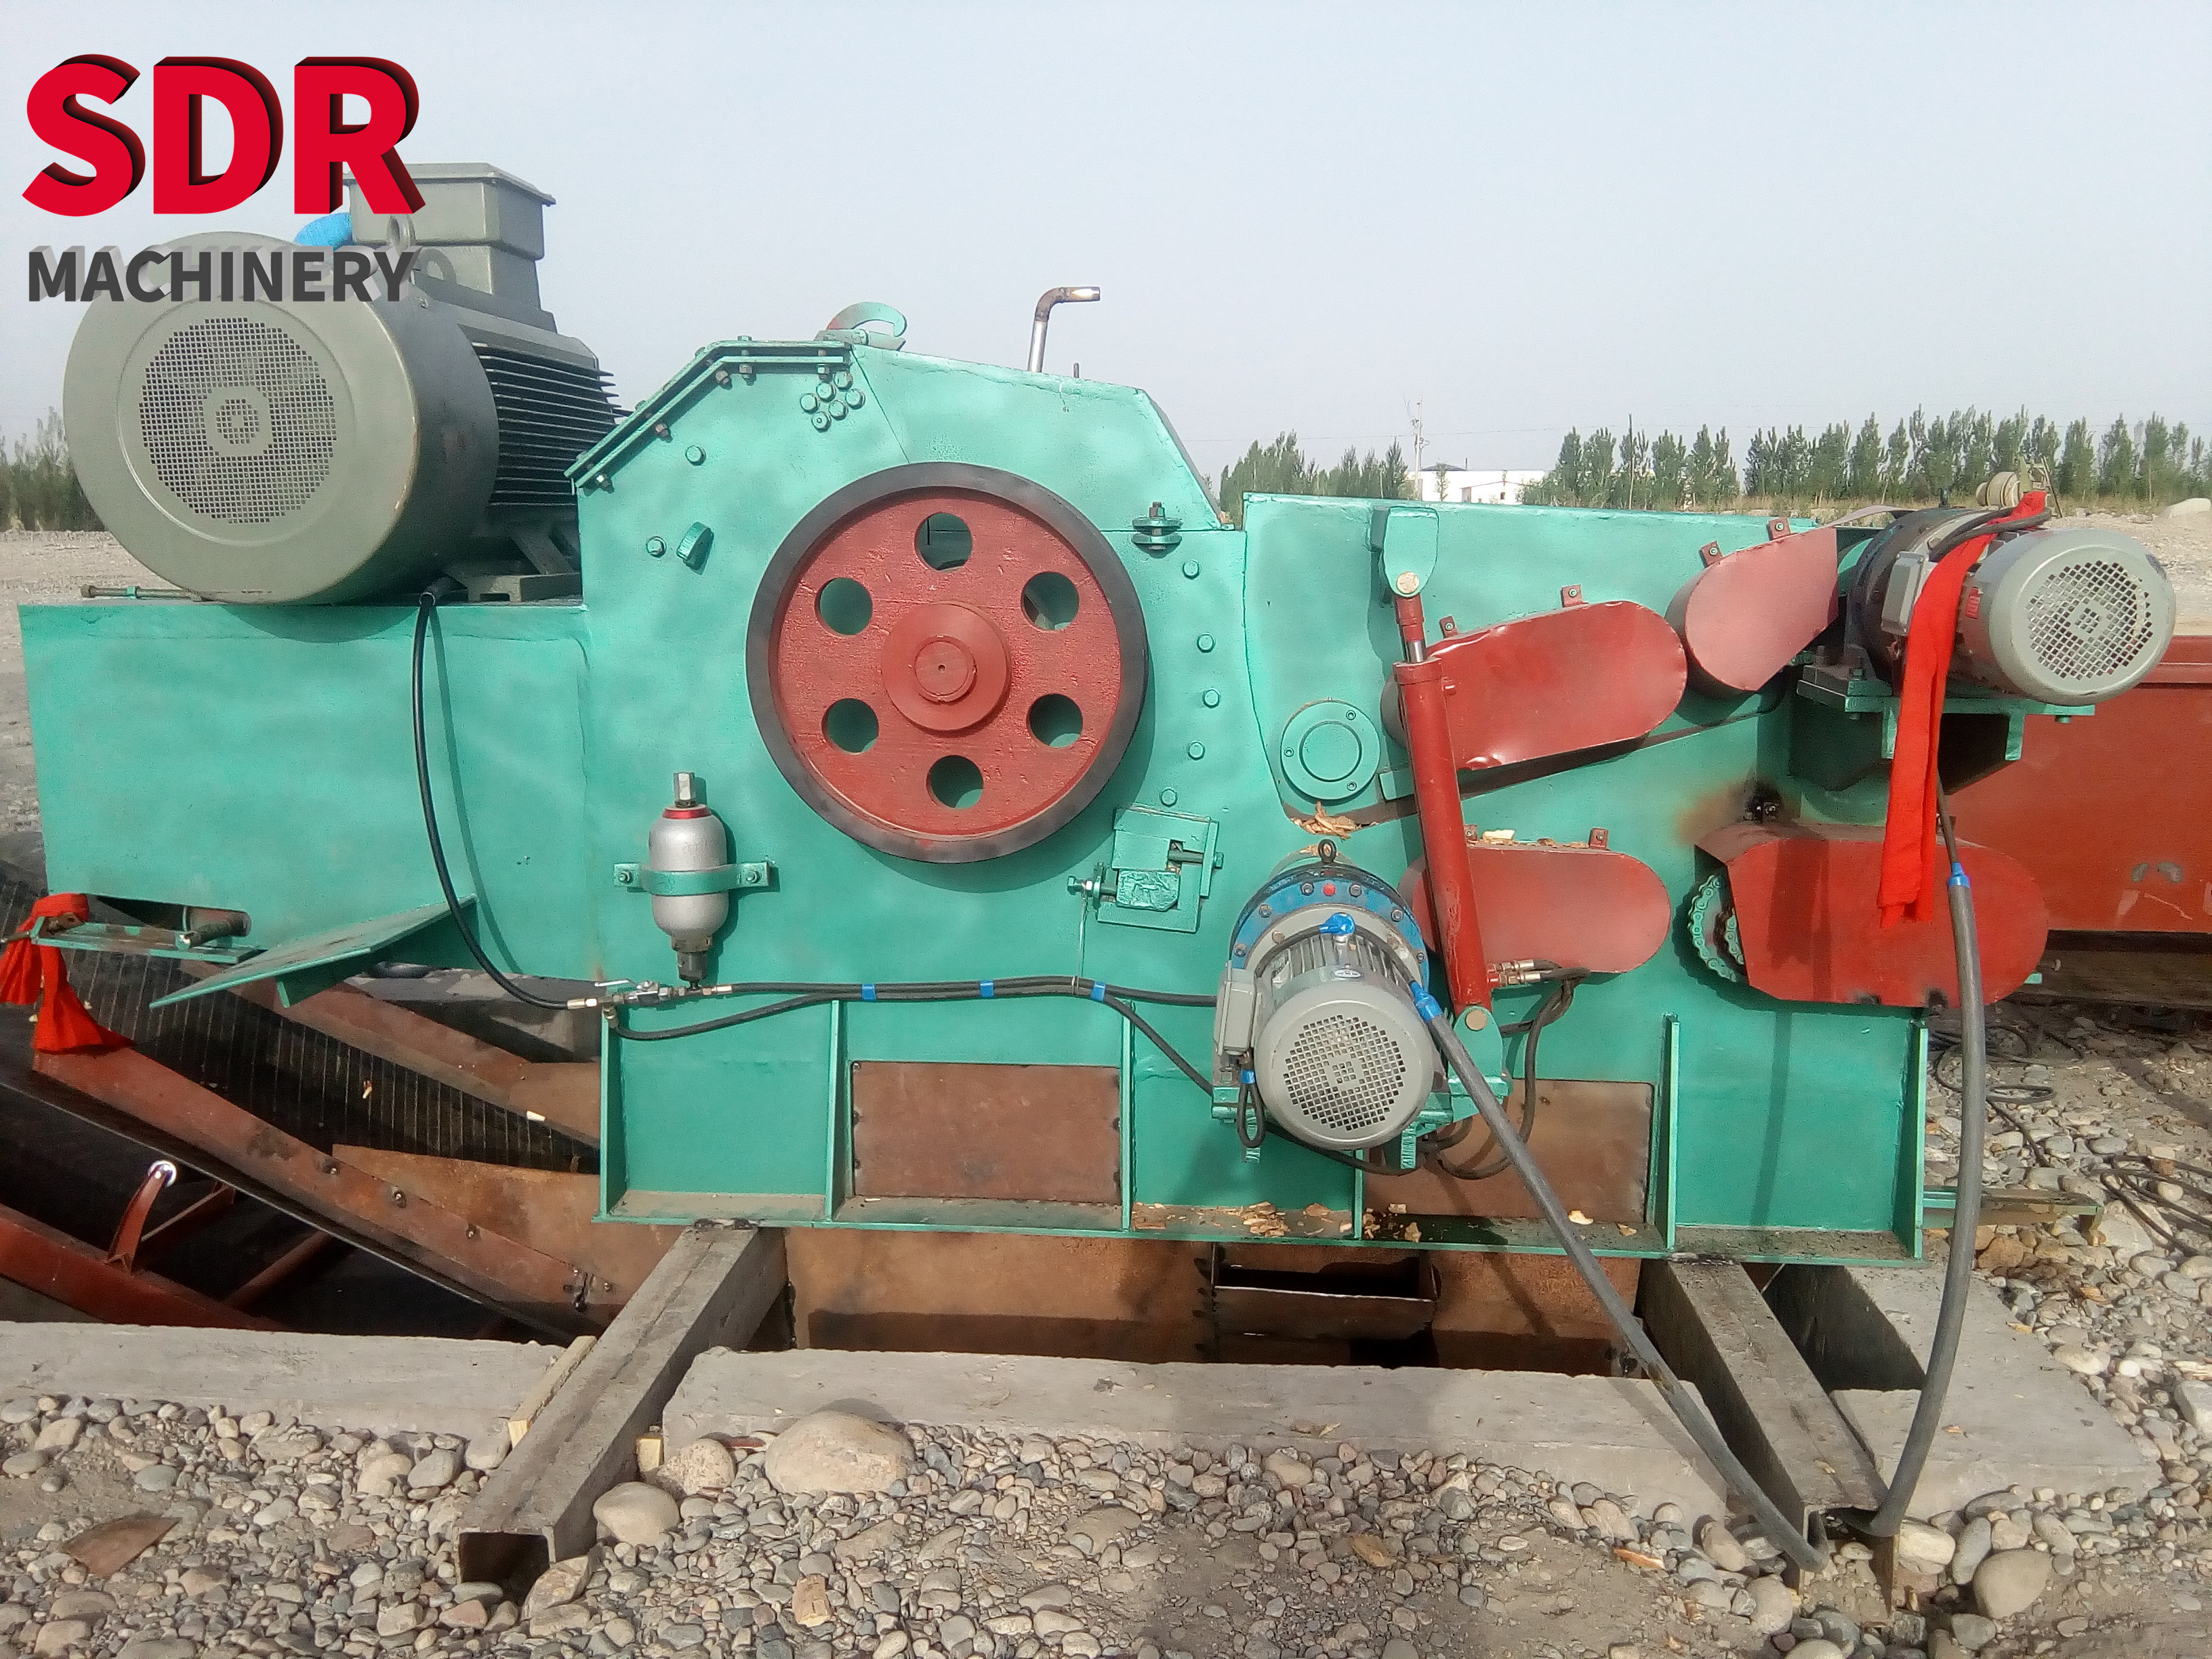 How to operate and maintain the drum wood chipper?